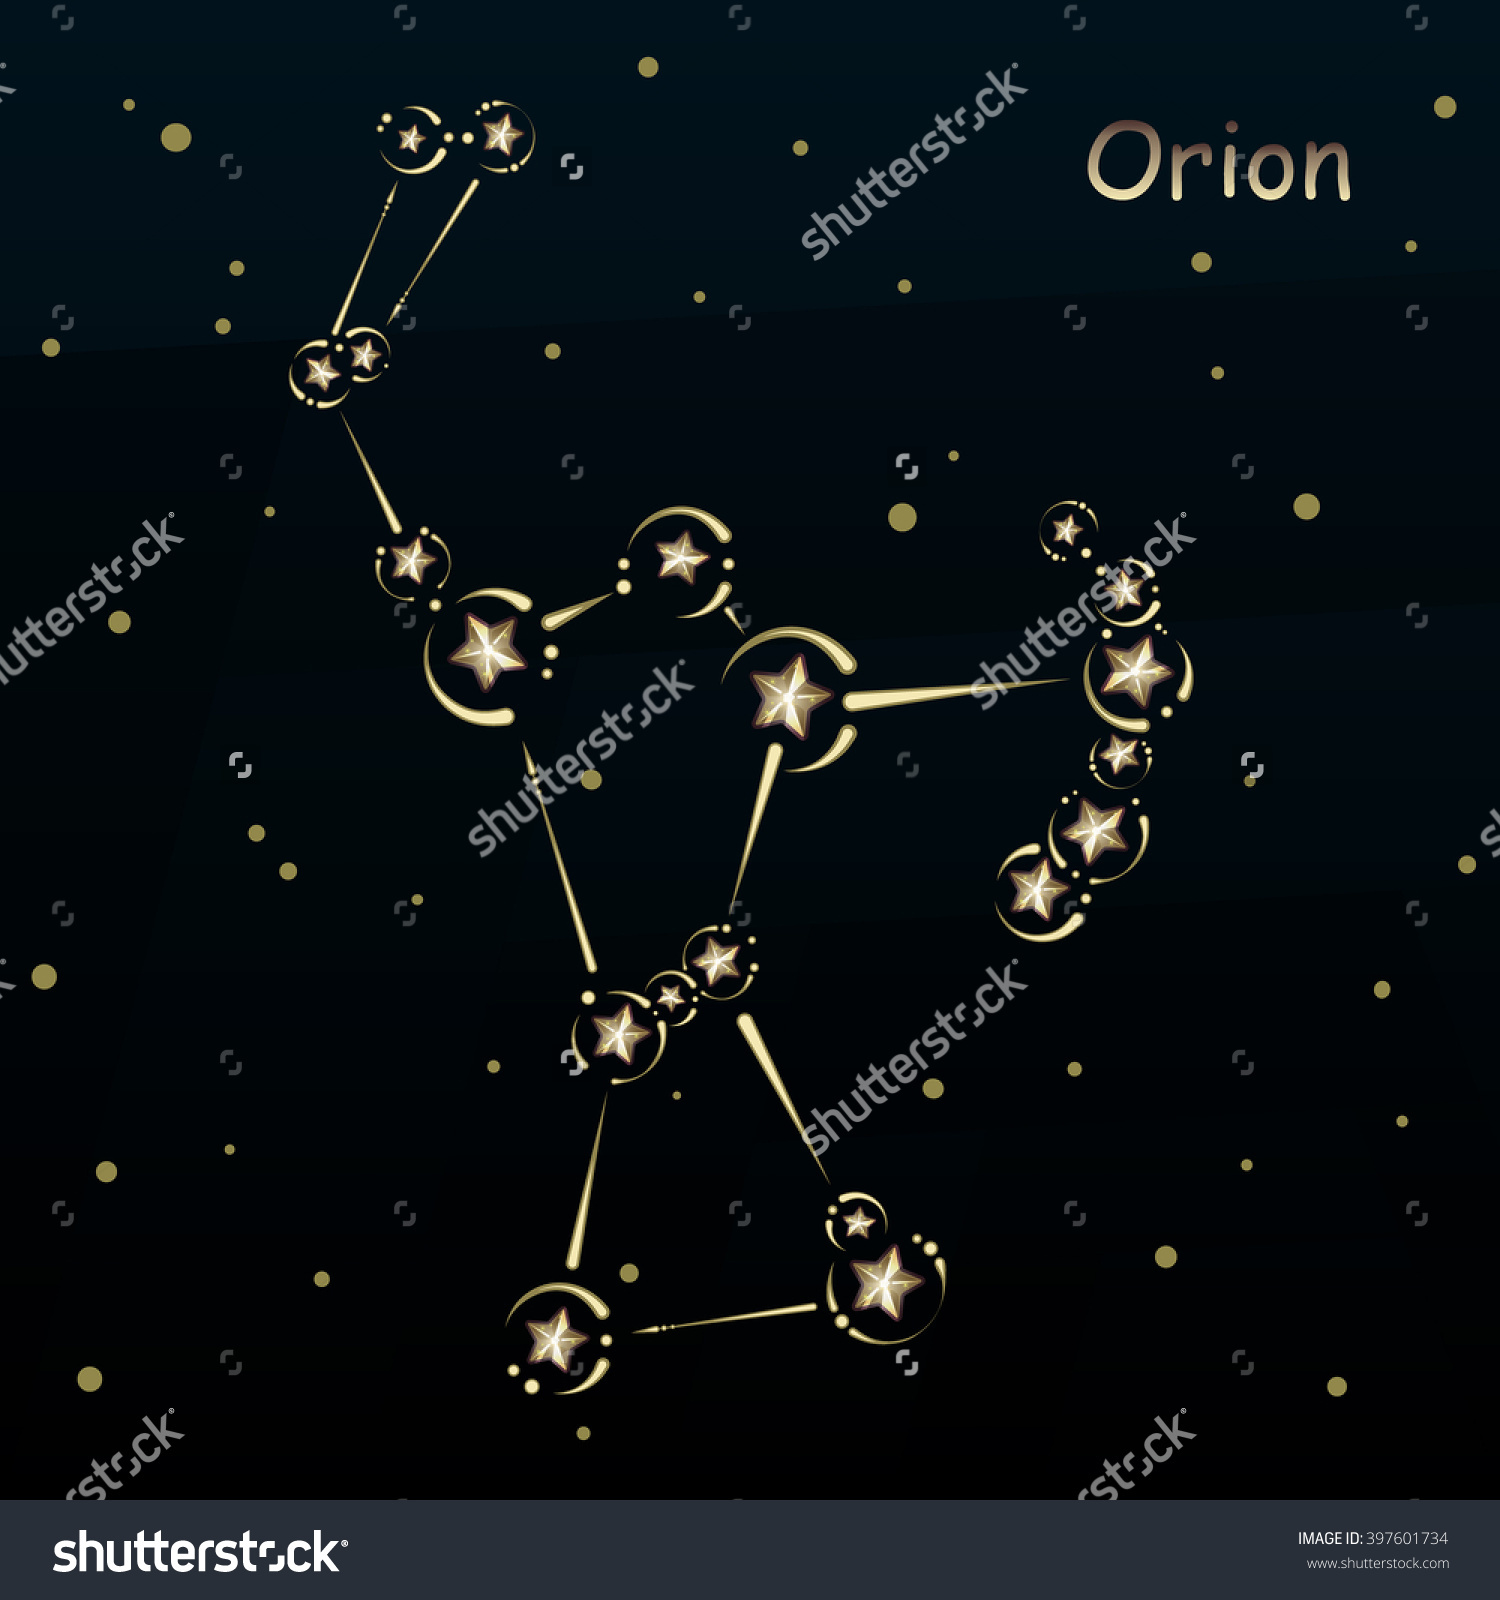 Orion On Dark Blue Background Surrounded Stock Vector 397601734.